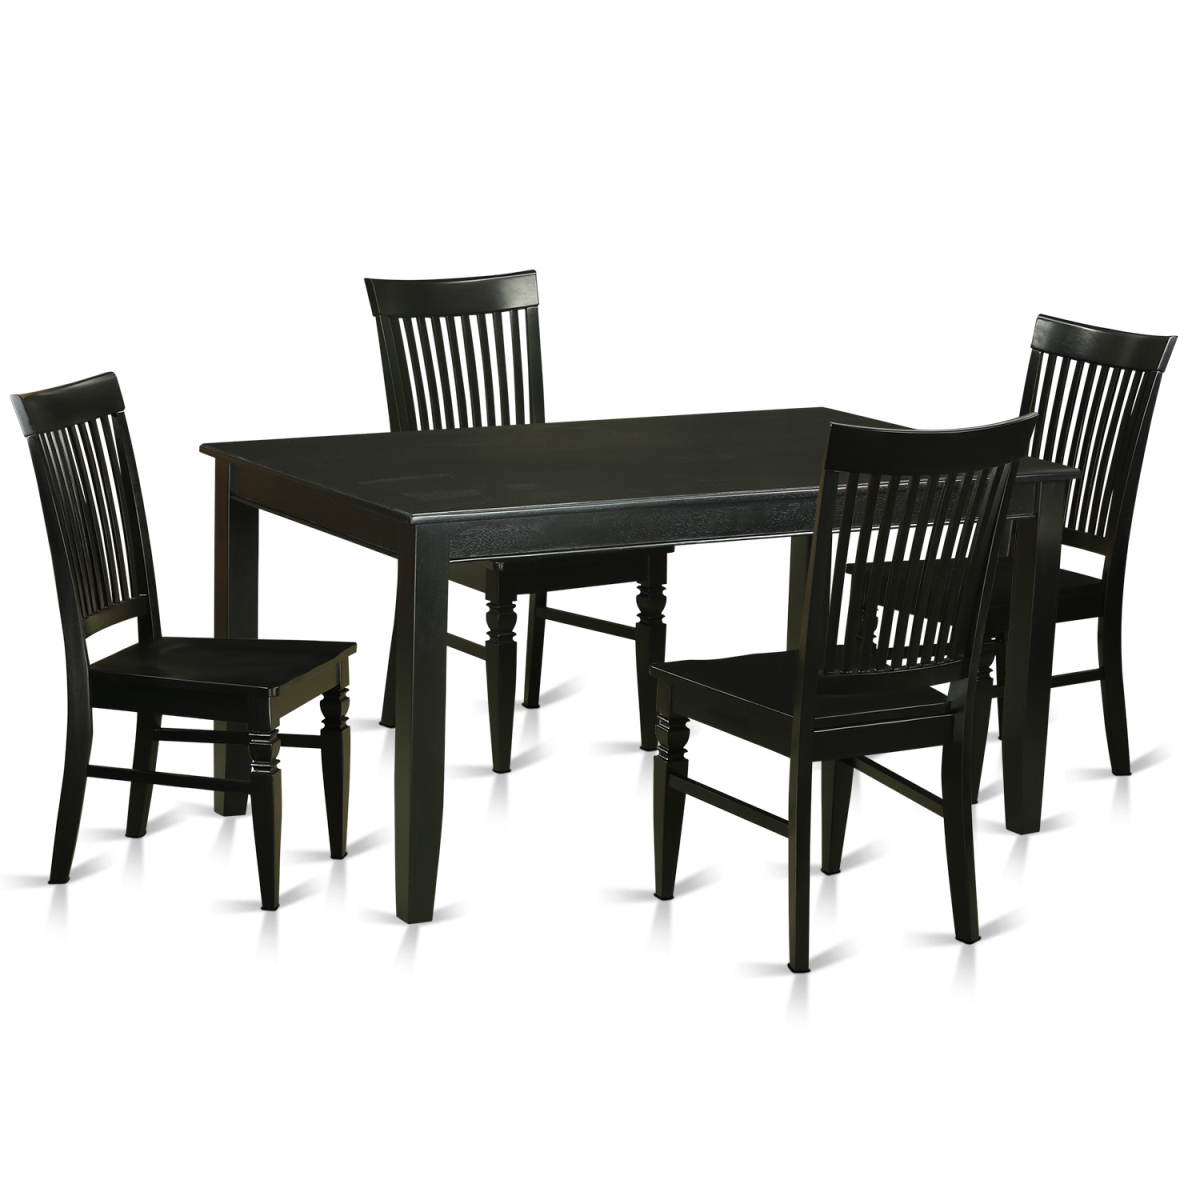 Dinette Table Set With 4 Kitchen Table & 4 Chairs, Black - 5 Piece